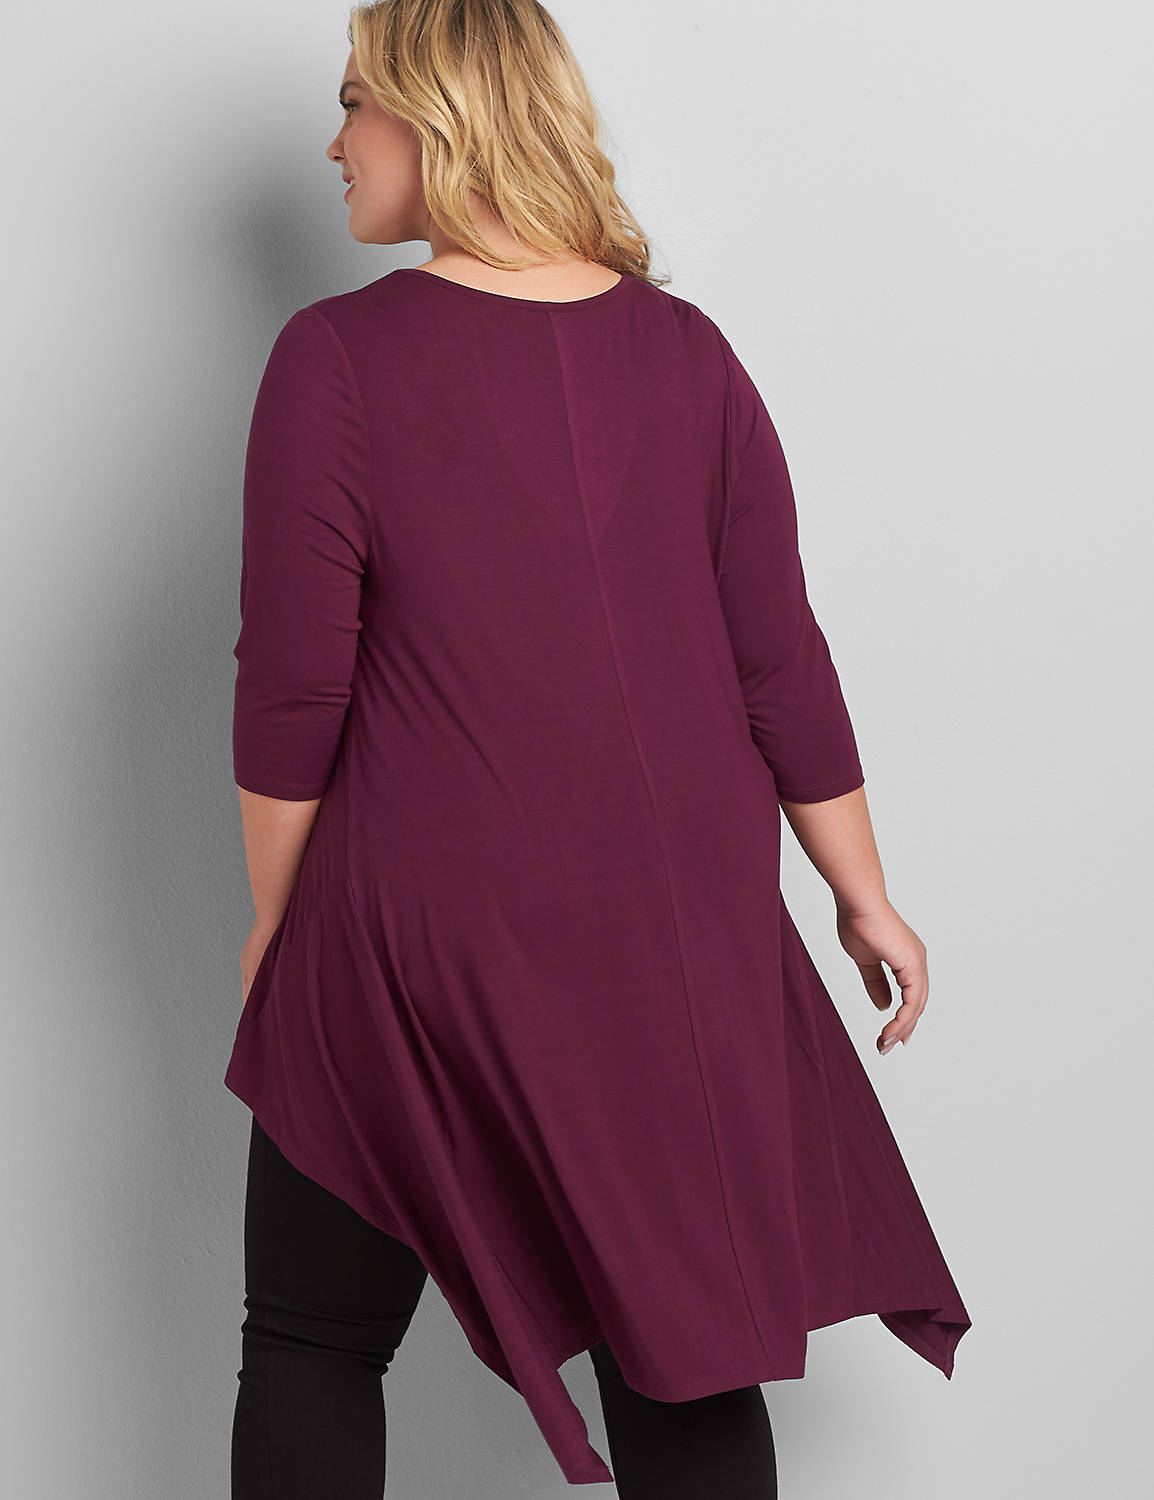 3/4 Sleeve Scoop Neck Extreme Asym Tunic 1115018:PANTONE Pickled Beet:18/20 Product Image 2